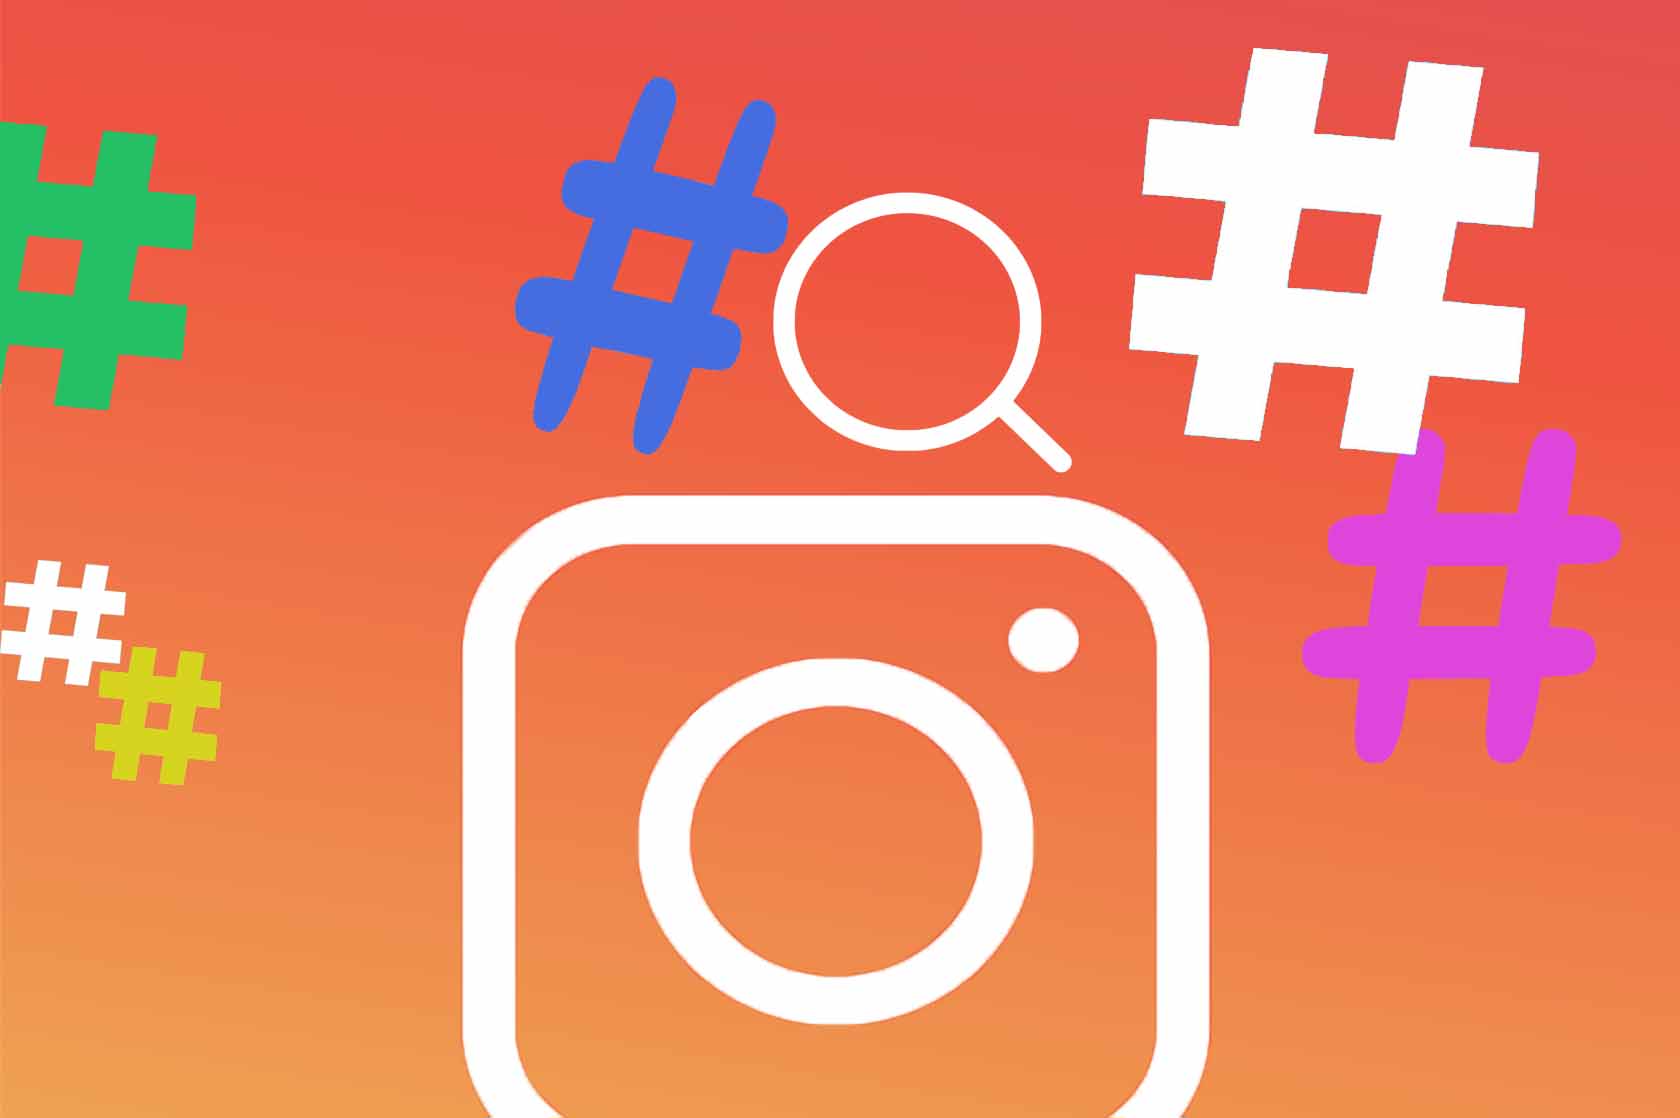 Hashtags on Instagram Stories: How to Use Them